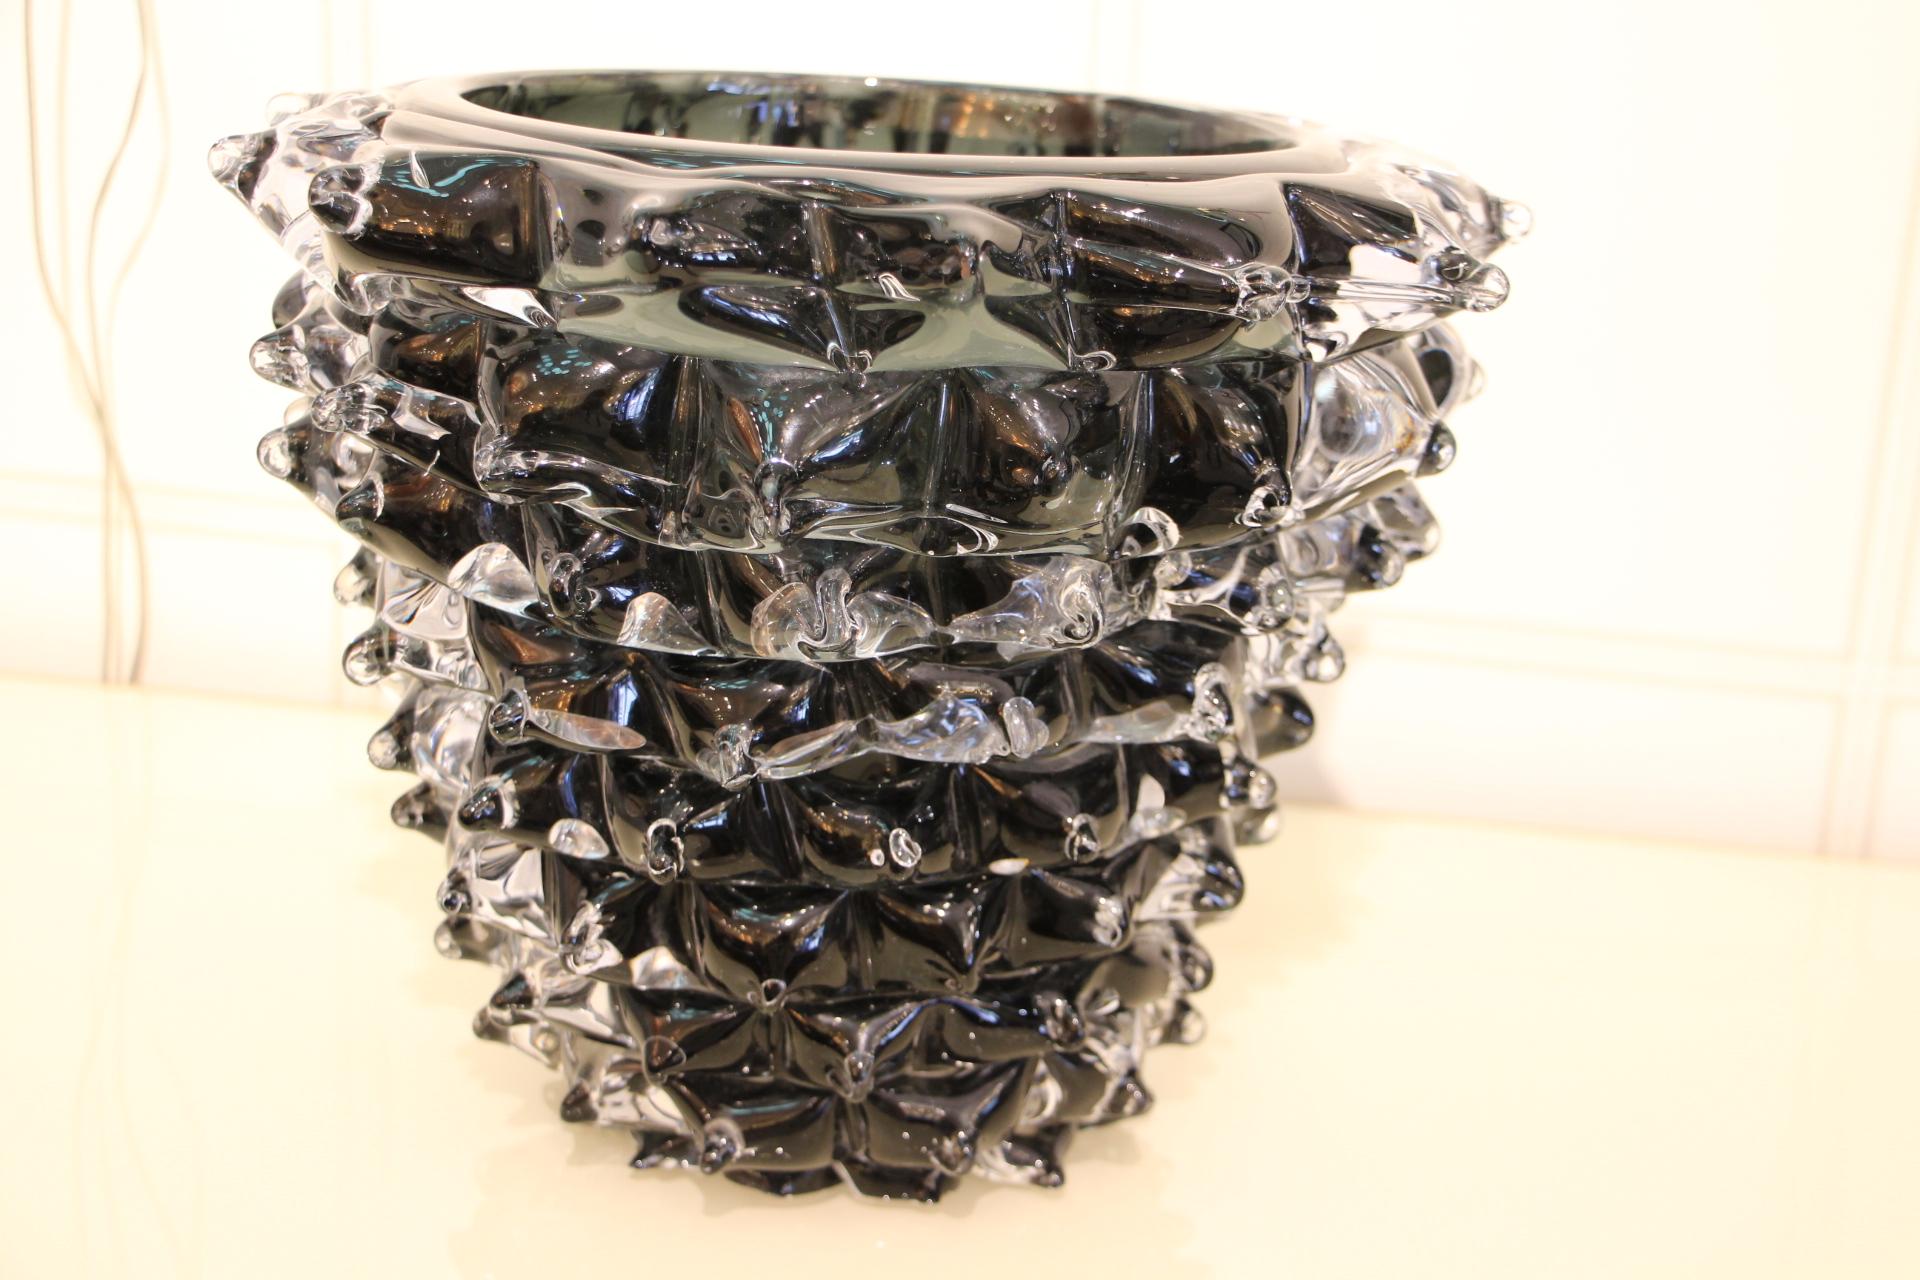 Black Vase in Murano Glass with Spikes Decor, Barovier Style, Rostrato 2